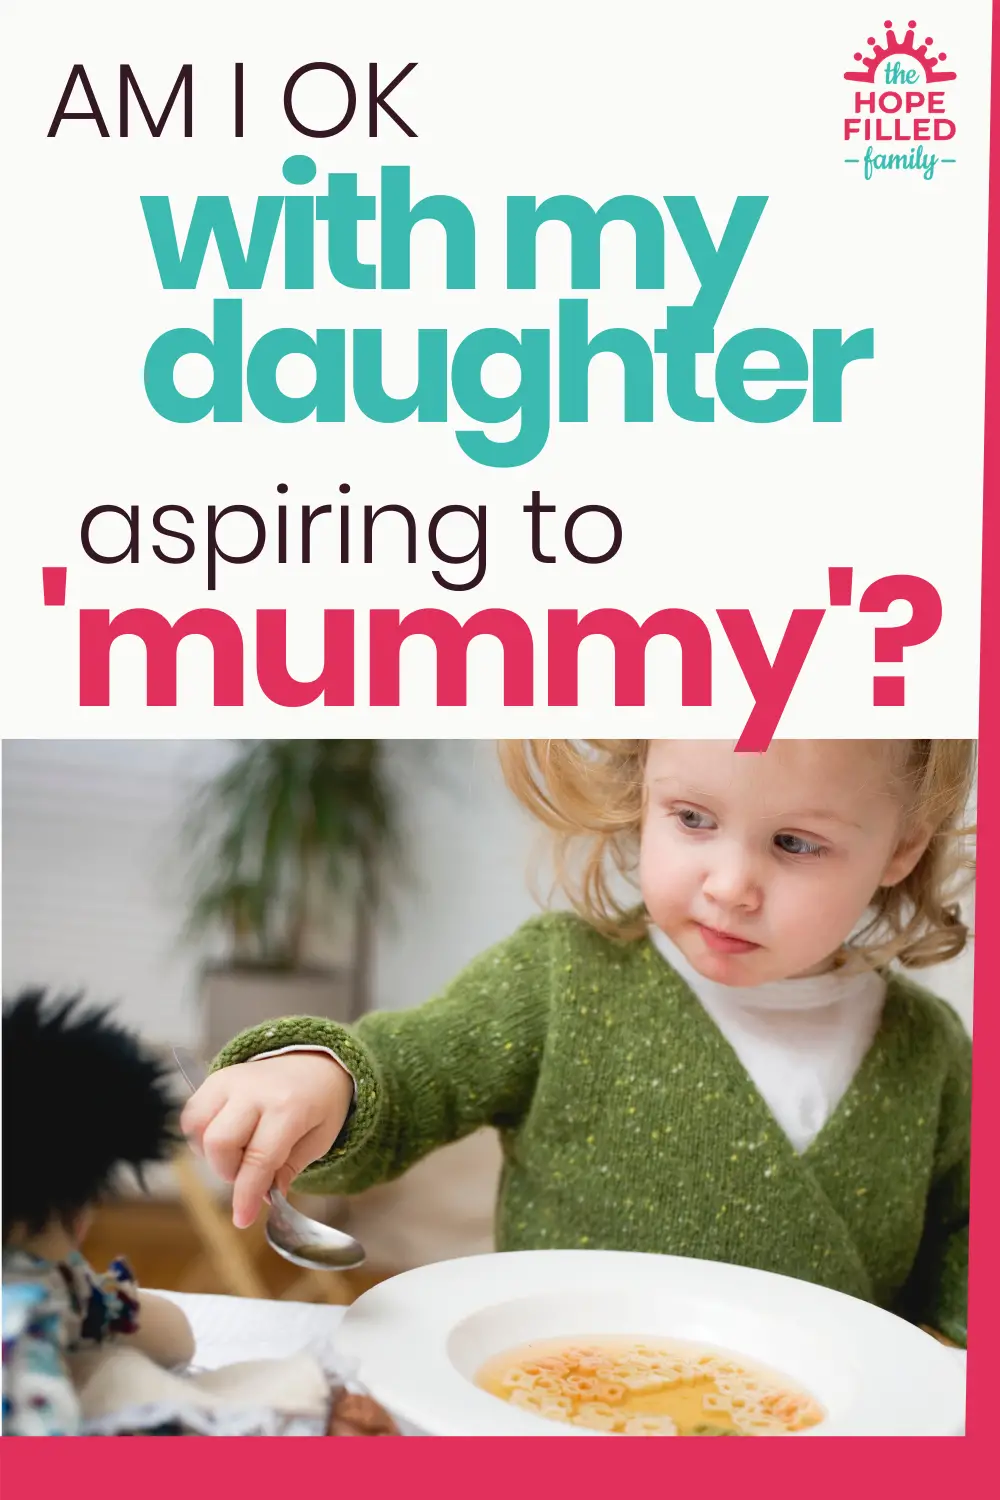 What if all my daughter wants to do in life is be a mummy? In other words - to be me? Can I really discourage her from pursuing what I've modelled to her?